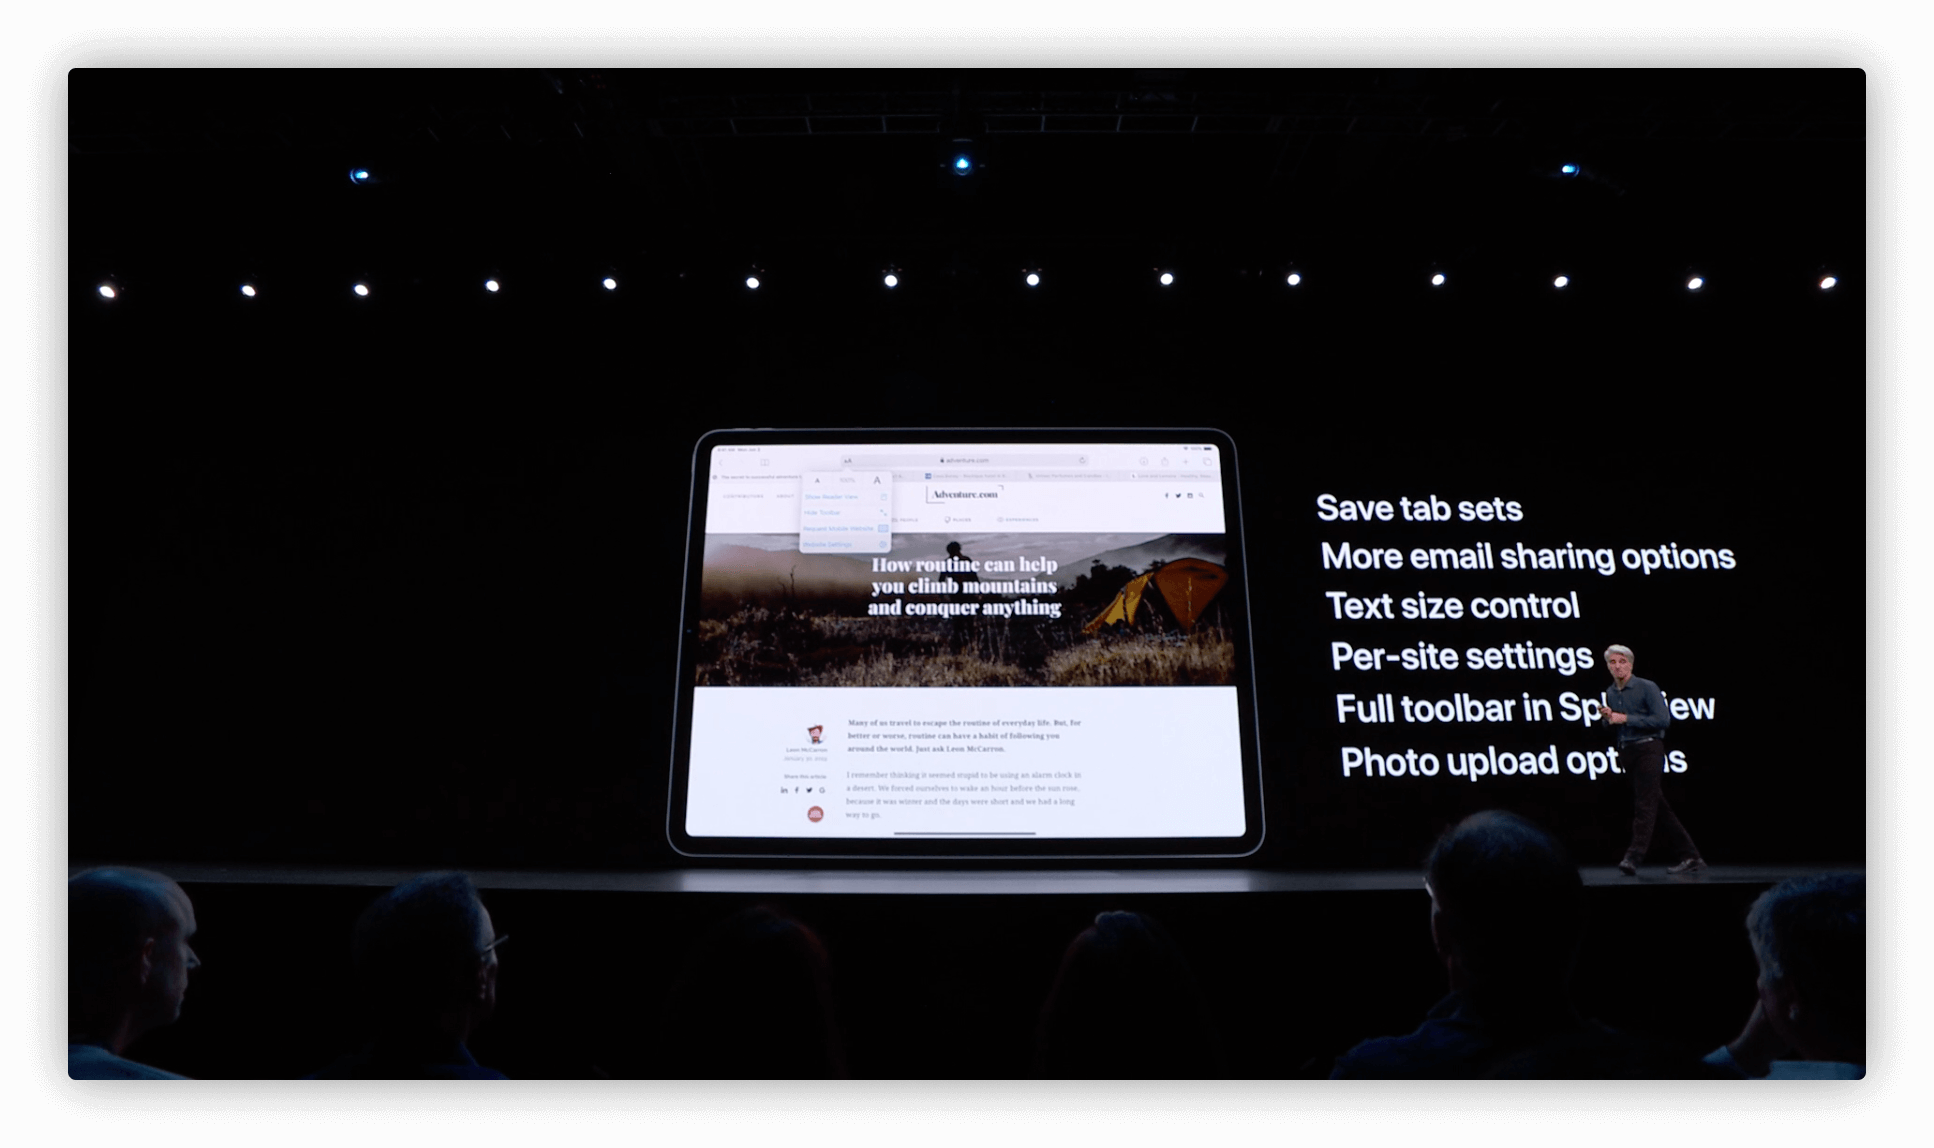 iPad OS and Login with Apple are new to iPhone or MacBook Air